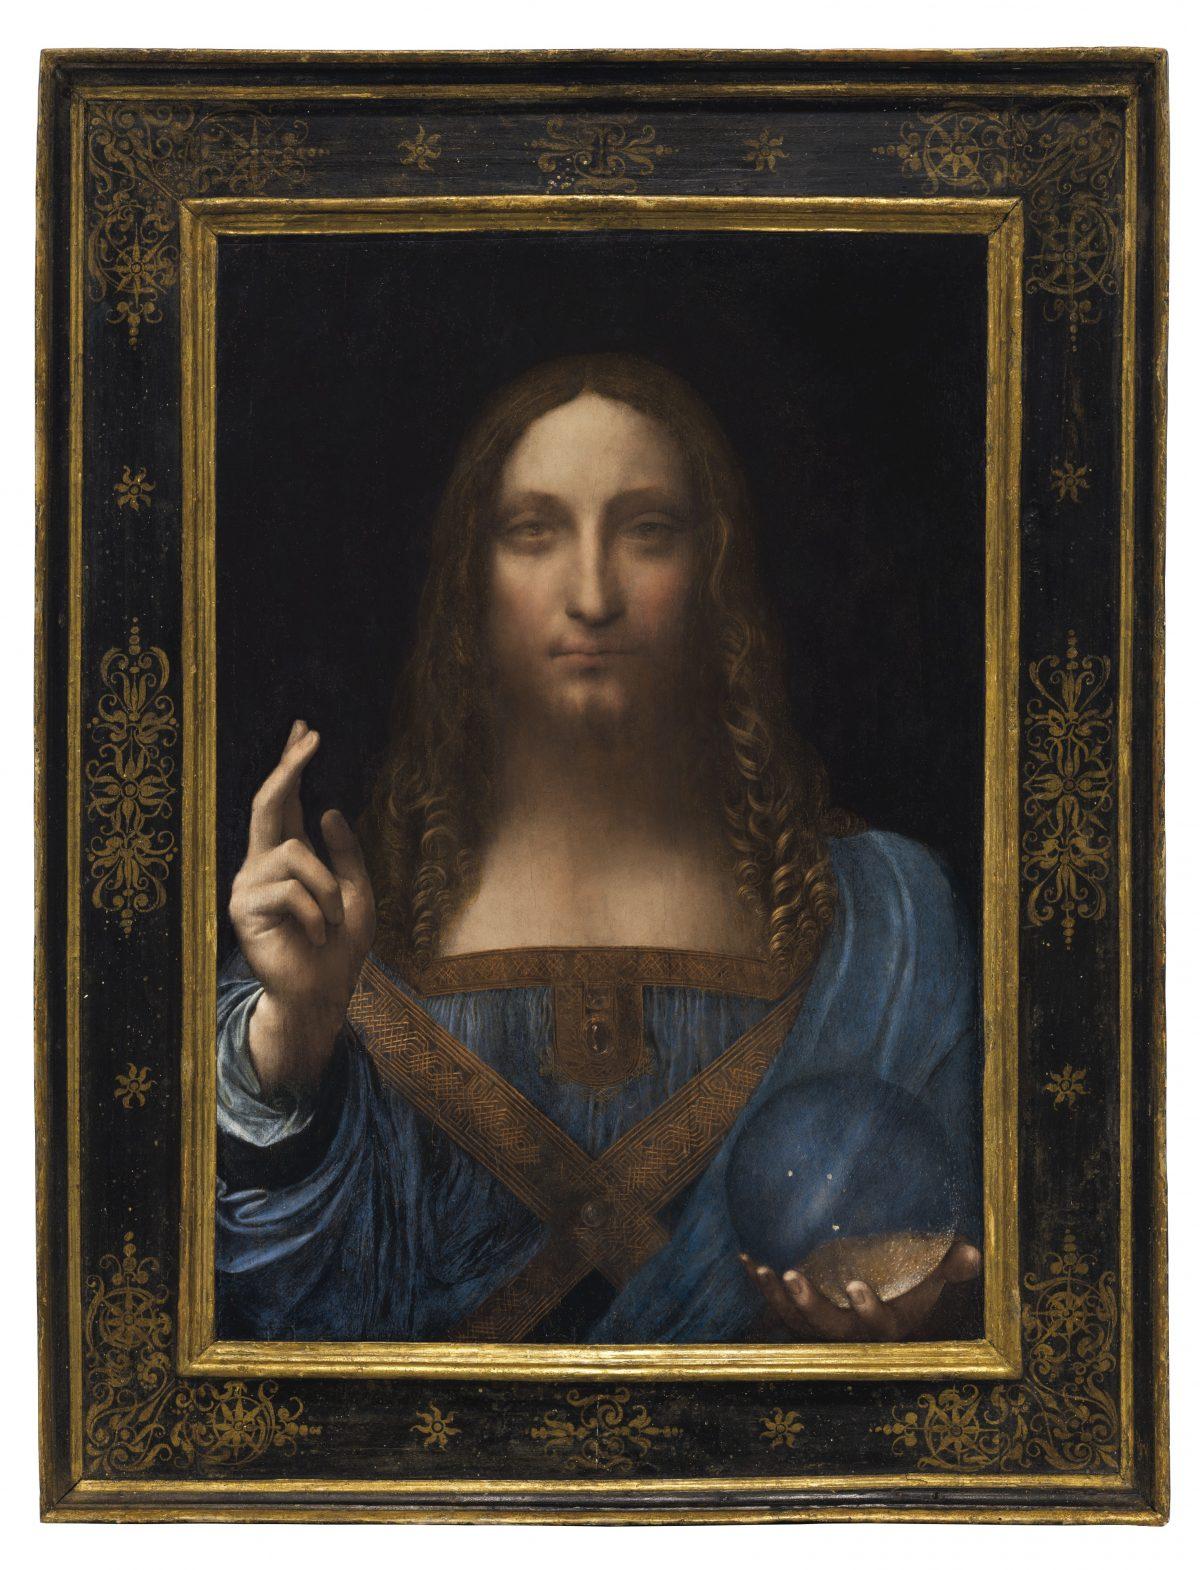 The most expensive painting ever auctioned off: “Salvator Mundi,” circa 1500, by Leonardo da Vinci (1452–1519). Oil on walnut wood panel, 25 13/16 inches by 17 15/16 inches. Private collection. (Courtesy of Christie’s)